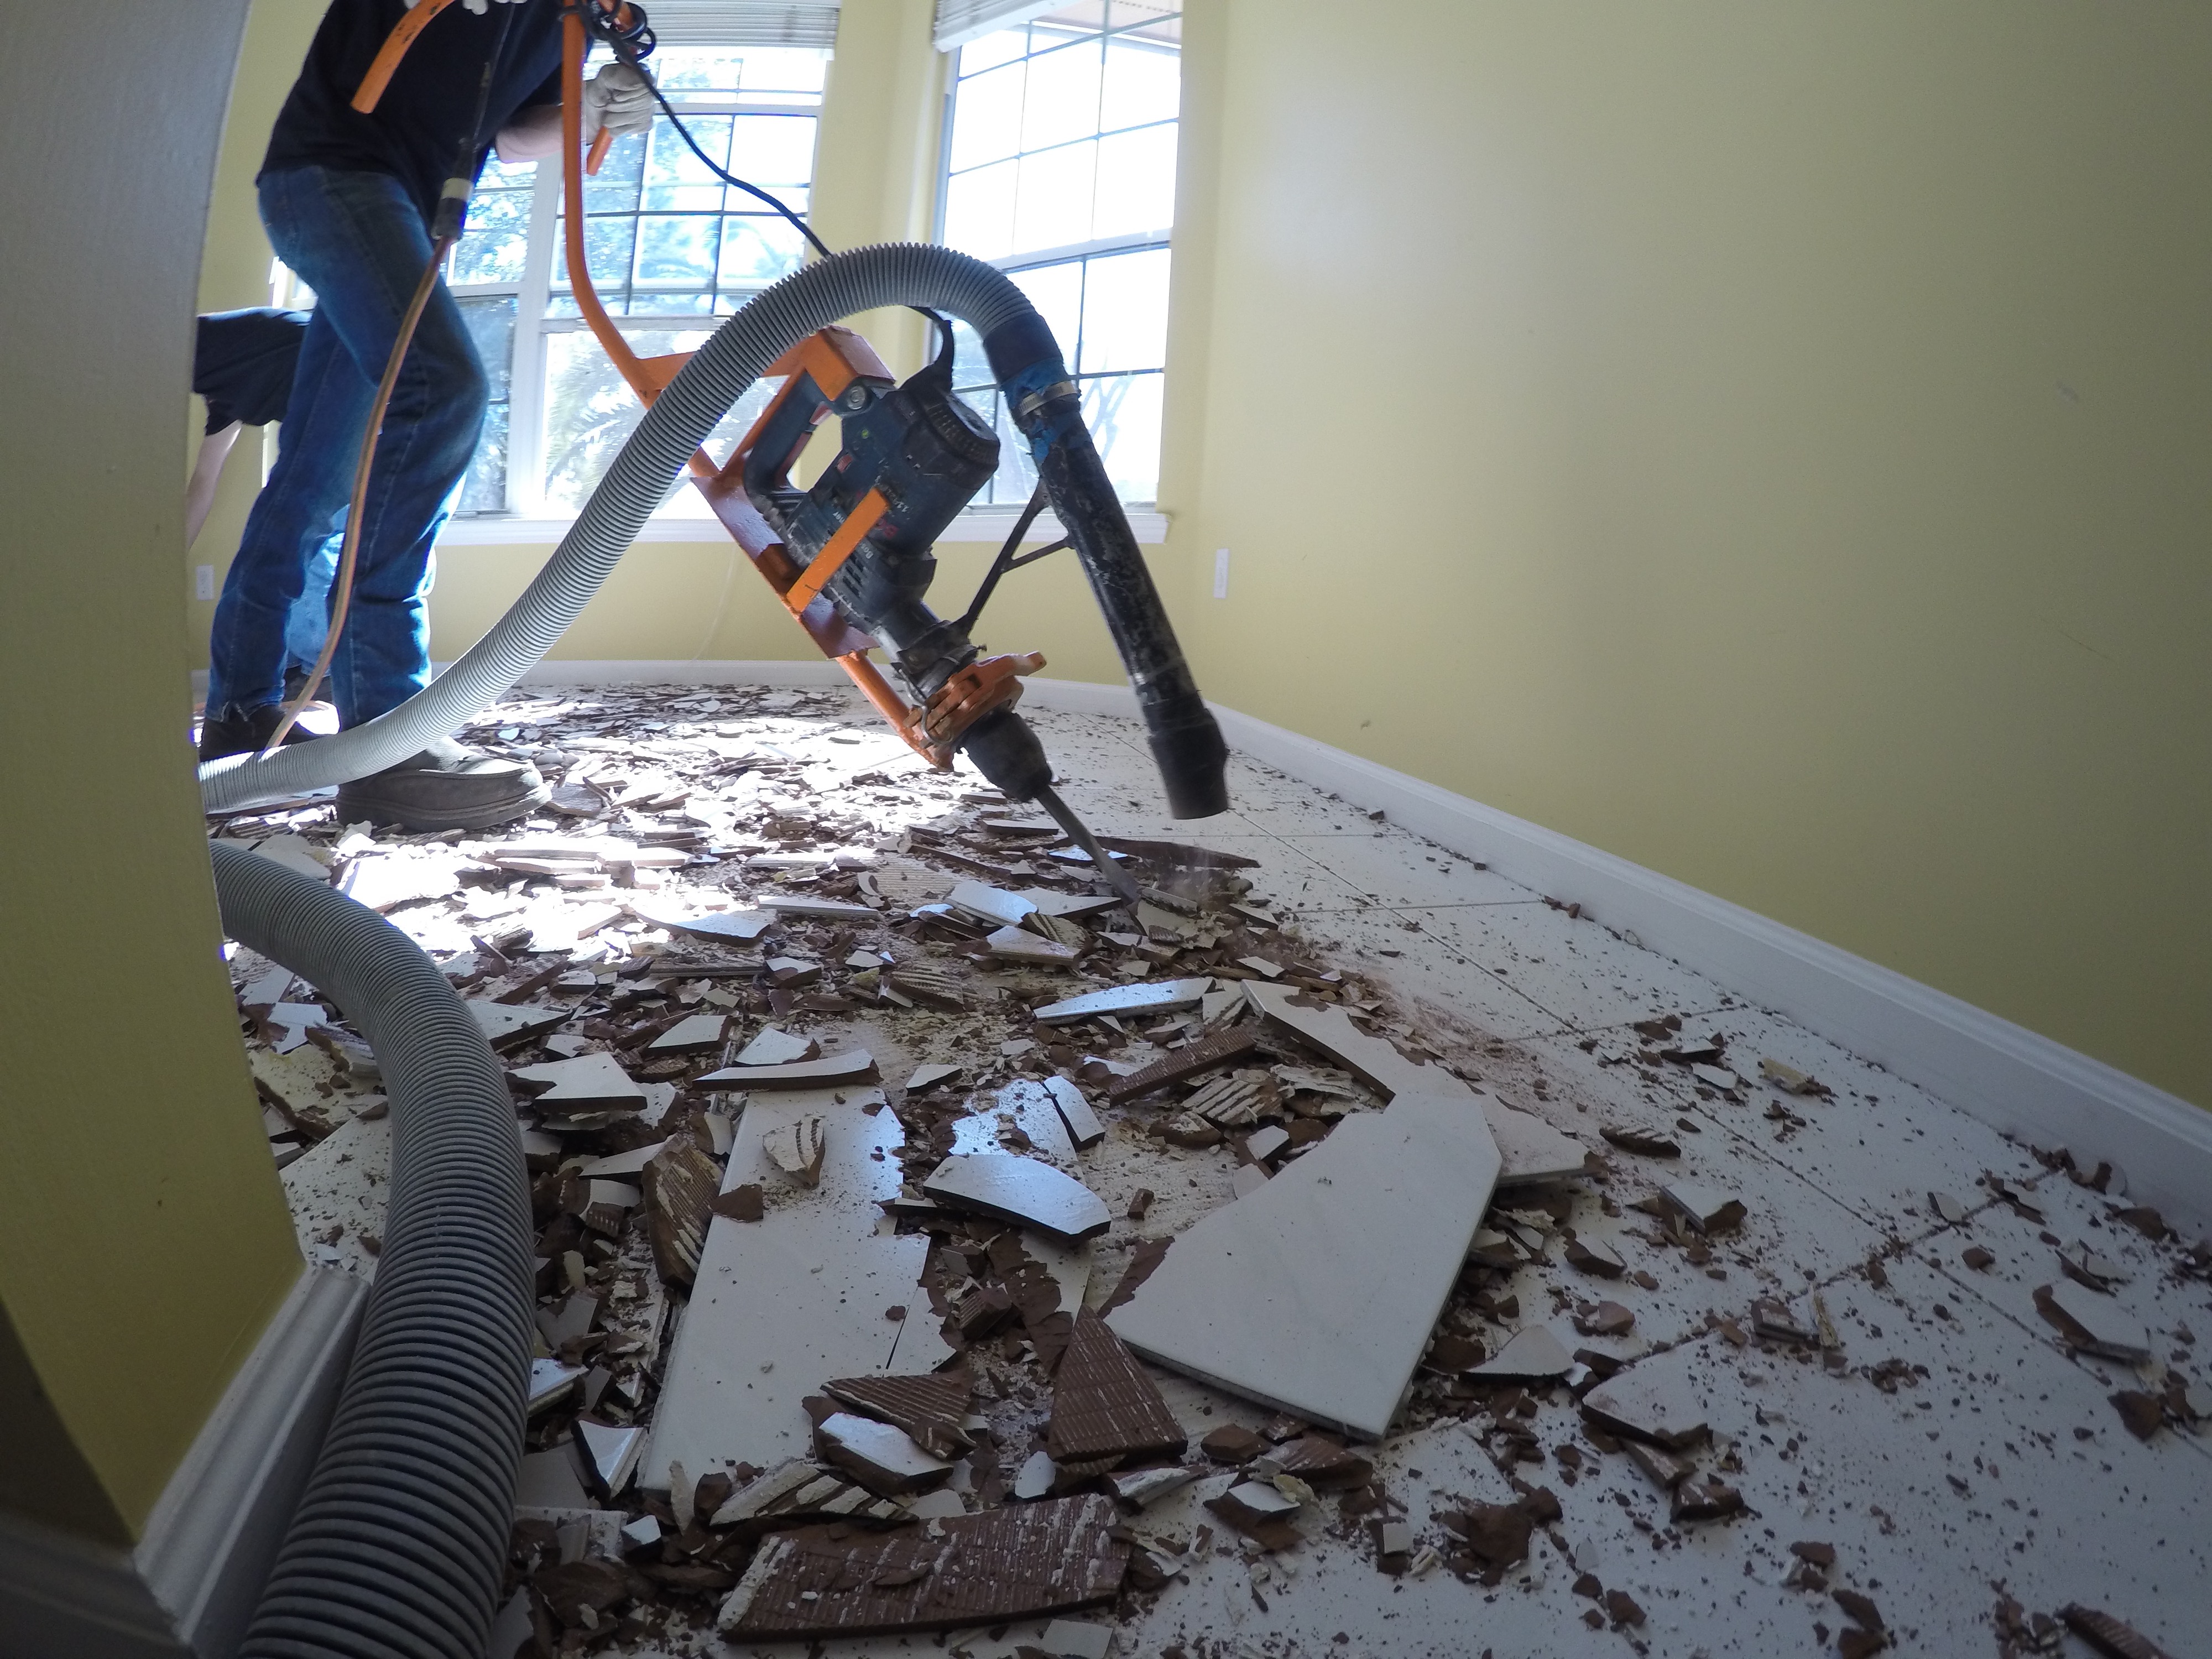 Tile Removal The Easy Way Sdy, How To Take Out Tile Flooring